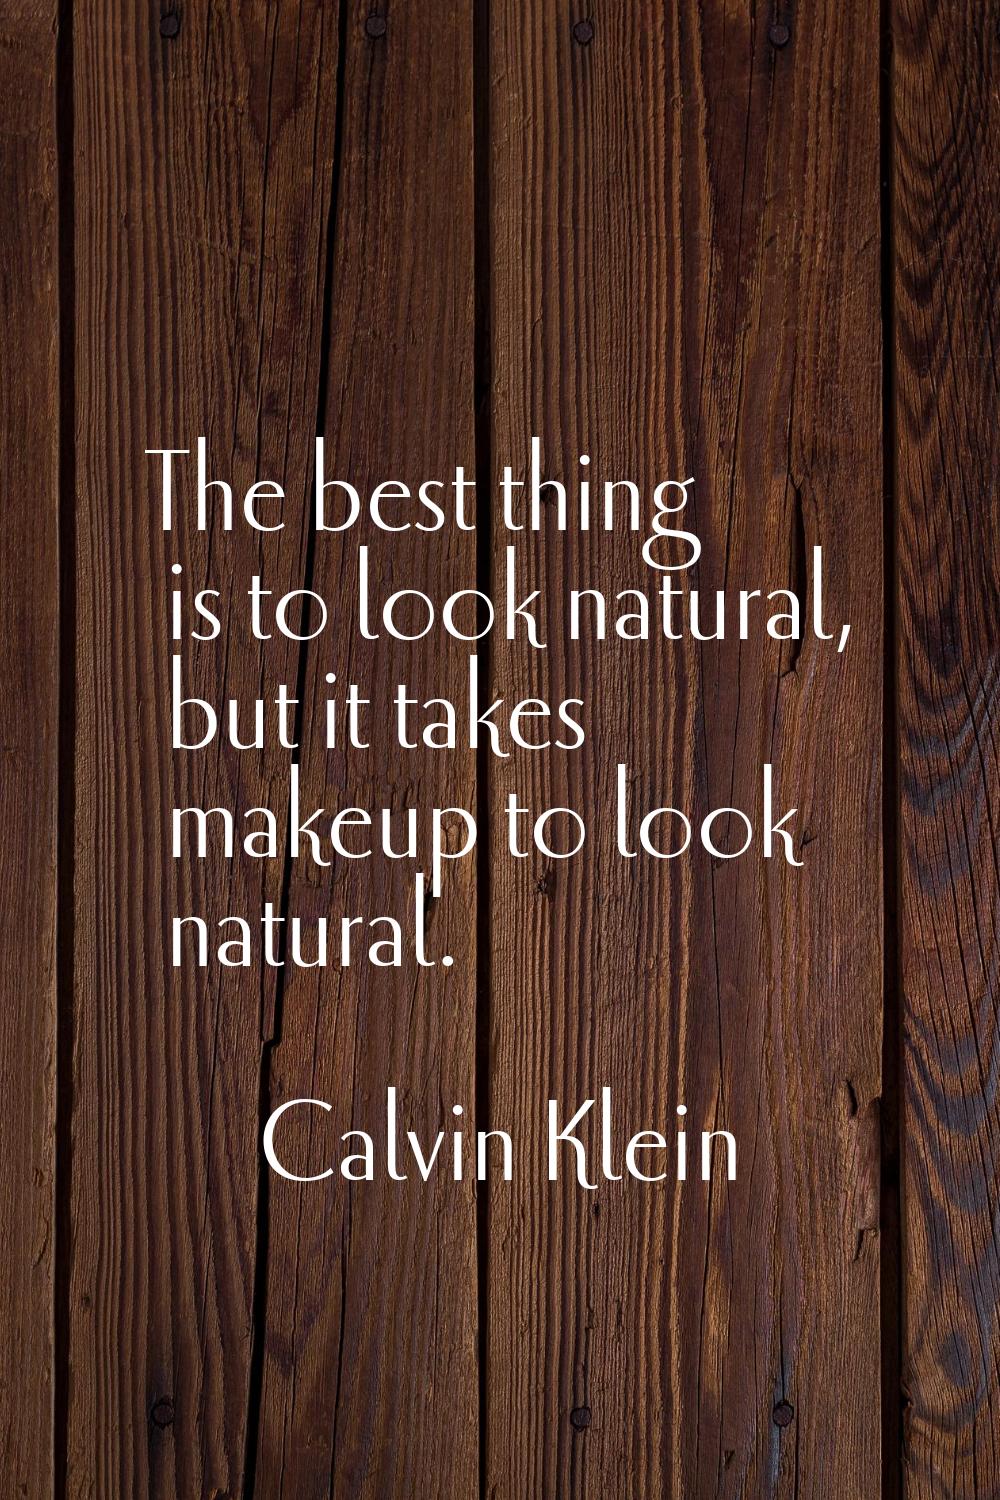 The best thing is to look natural, but it takes makeup to look natural.